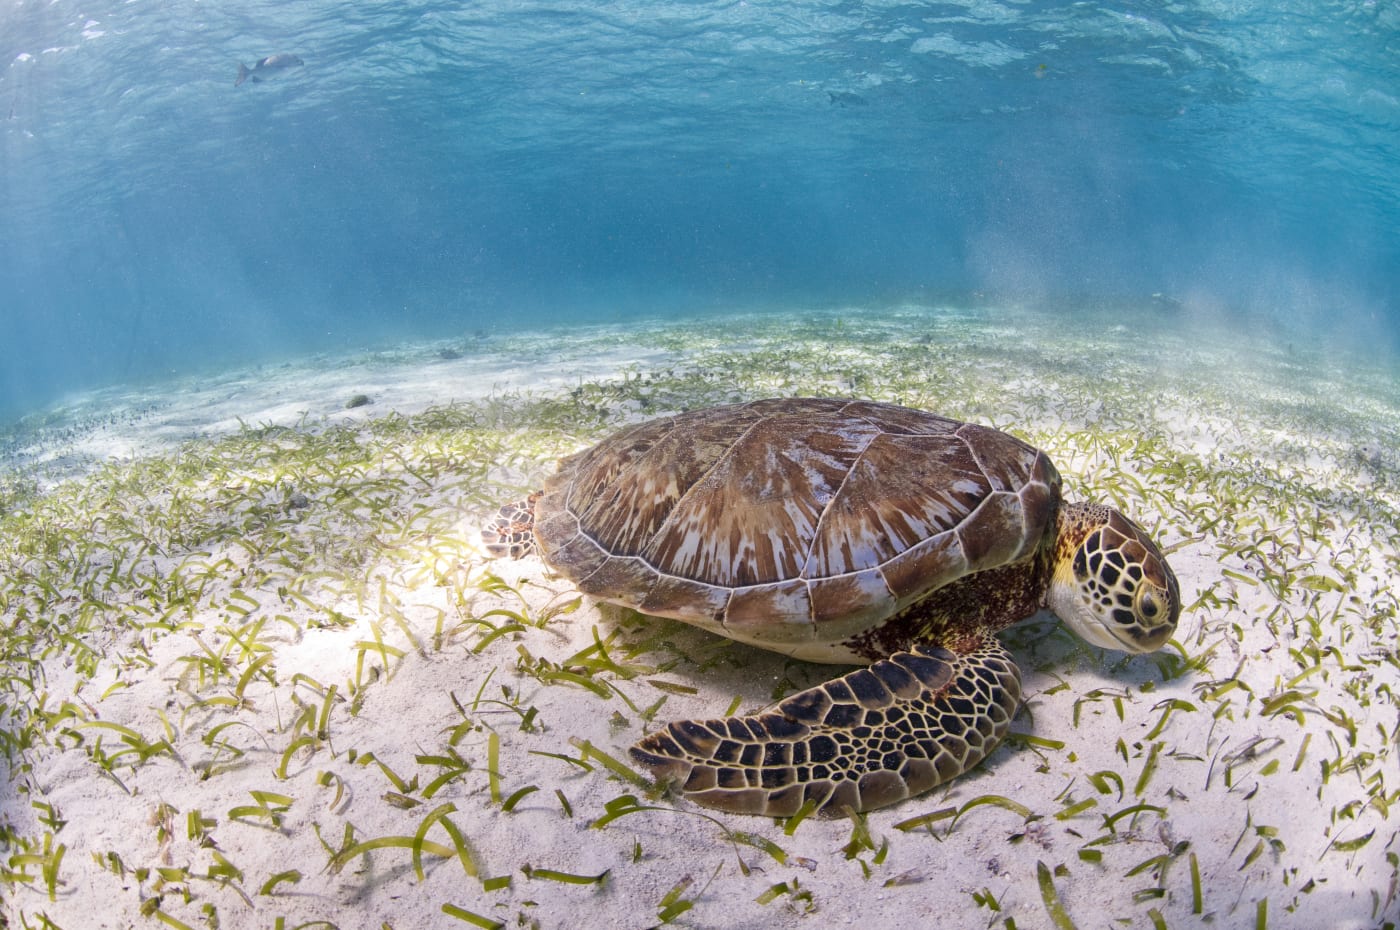 A green sea turtle amongst sea grass at Hol Chan Marine Reserve in Belize, Central America.